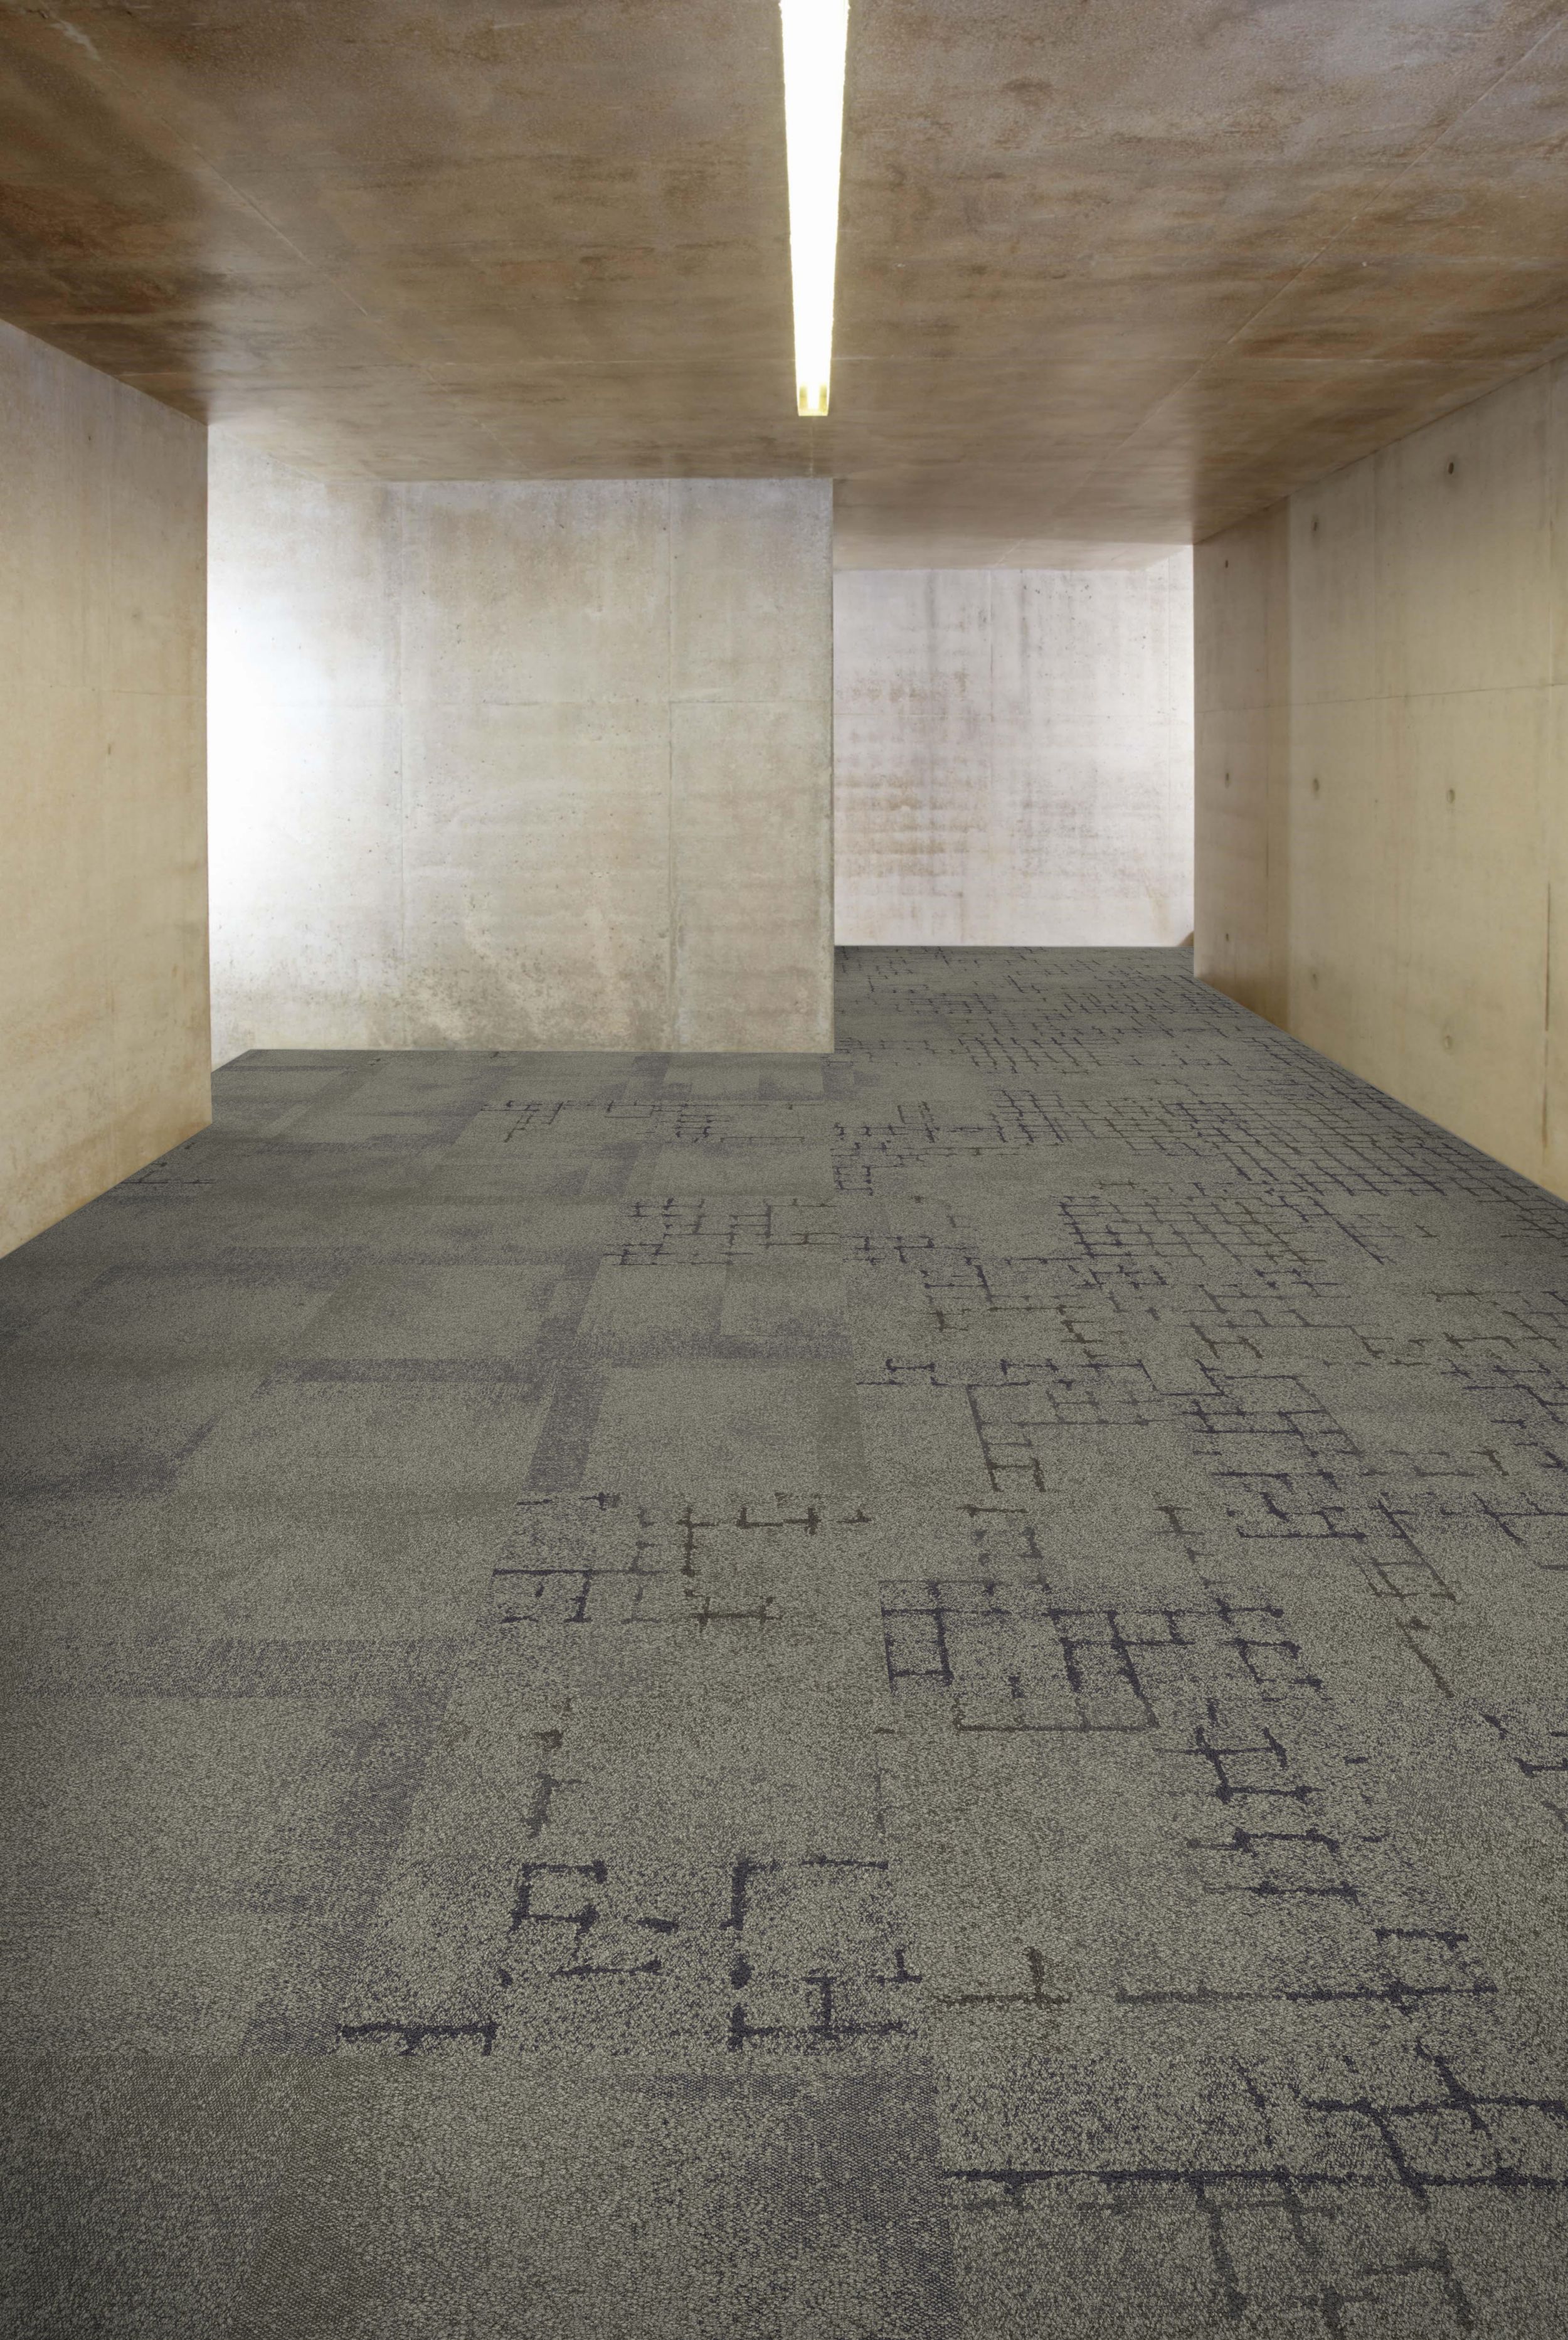 Interface Flagstone, Kerbstone and Sett in Stone carpet tile in corridor with concrete walls and ceiling numéro d’image 2